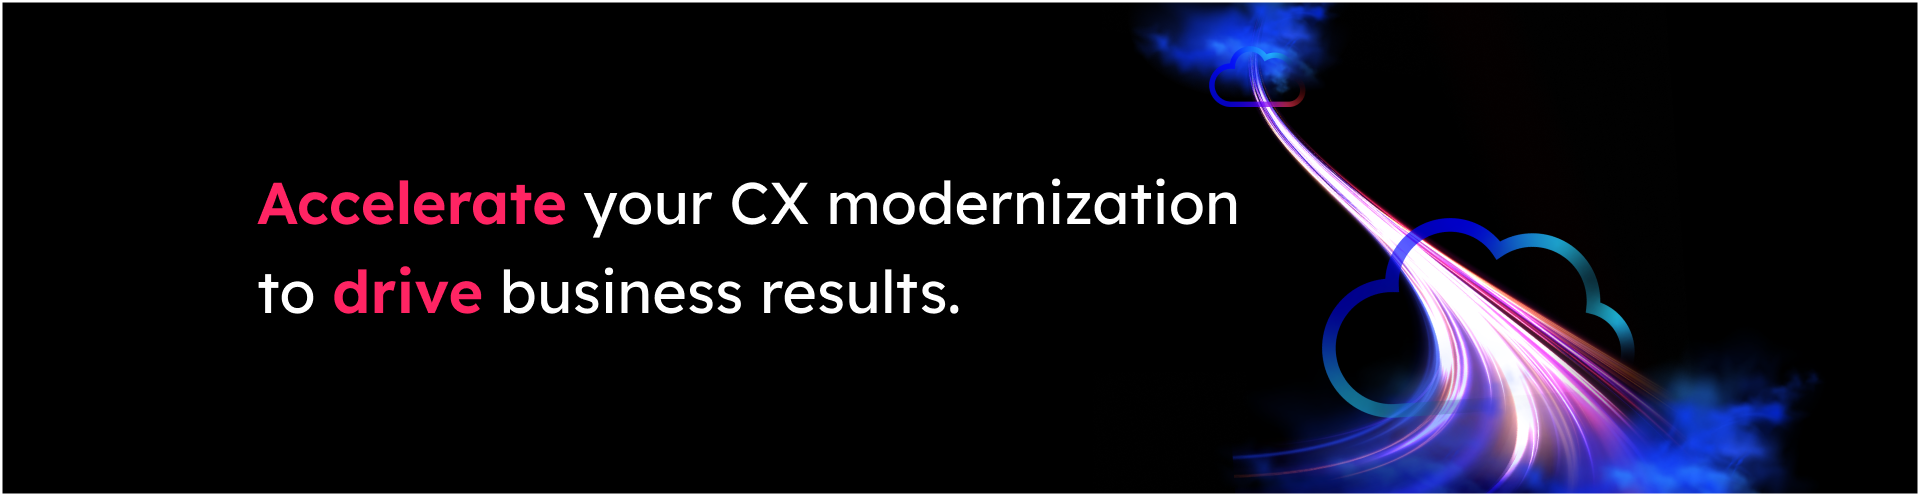 Accelerate your CX modernization to drive business results. 